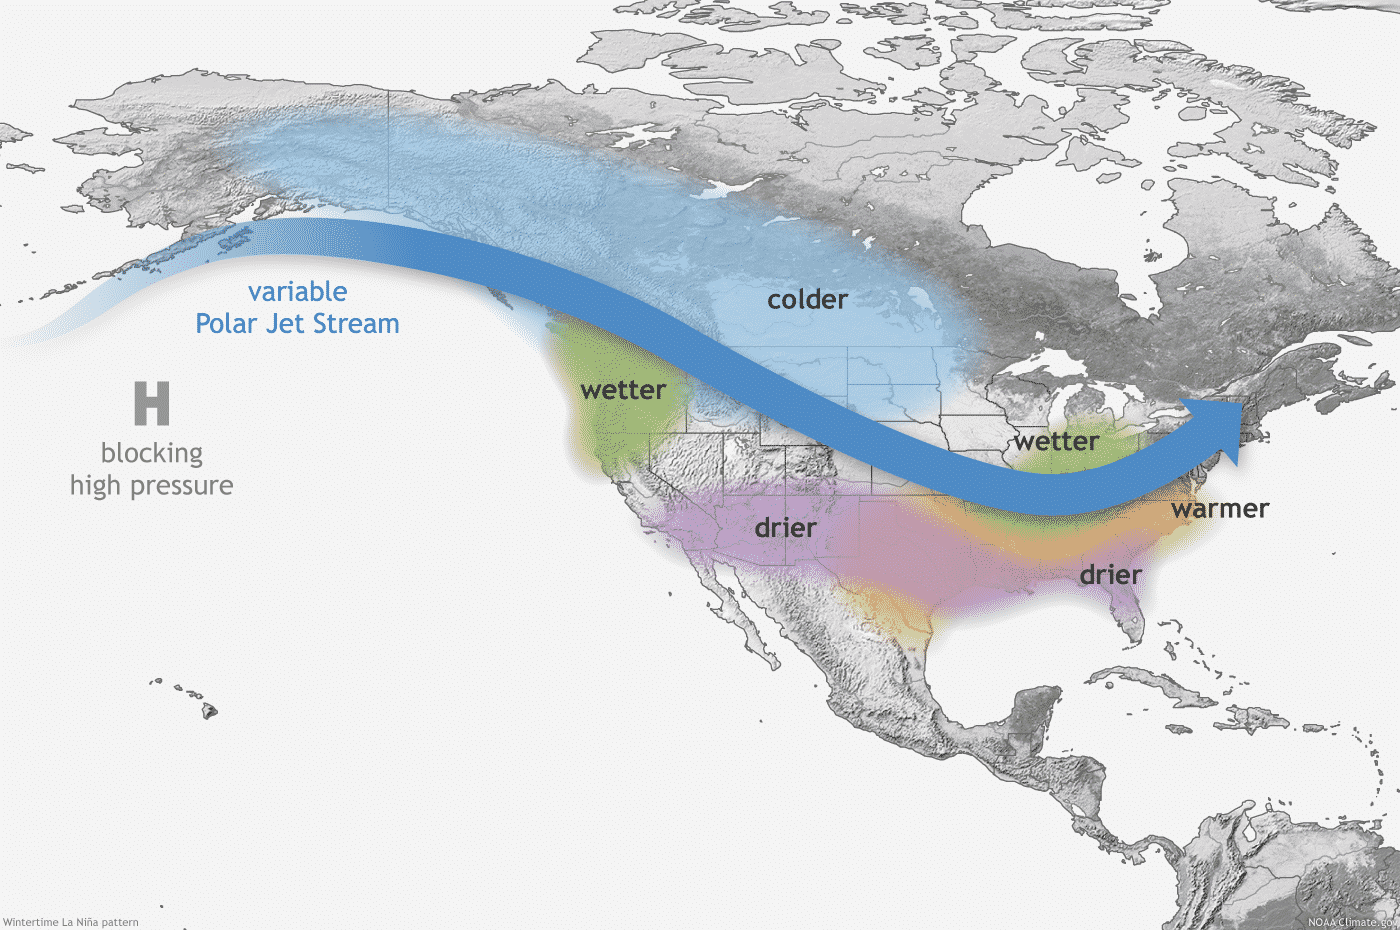 summer-forecast-enso-jet-stream-winter-impact-united-states-cold-pattern